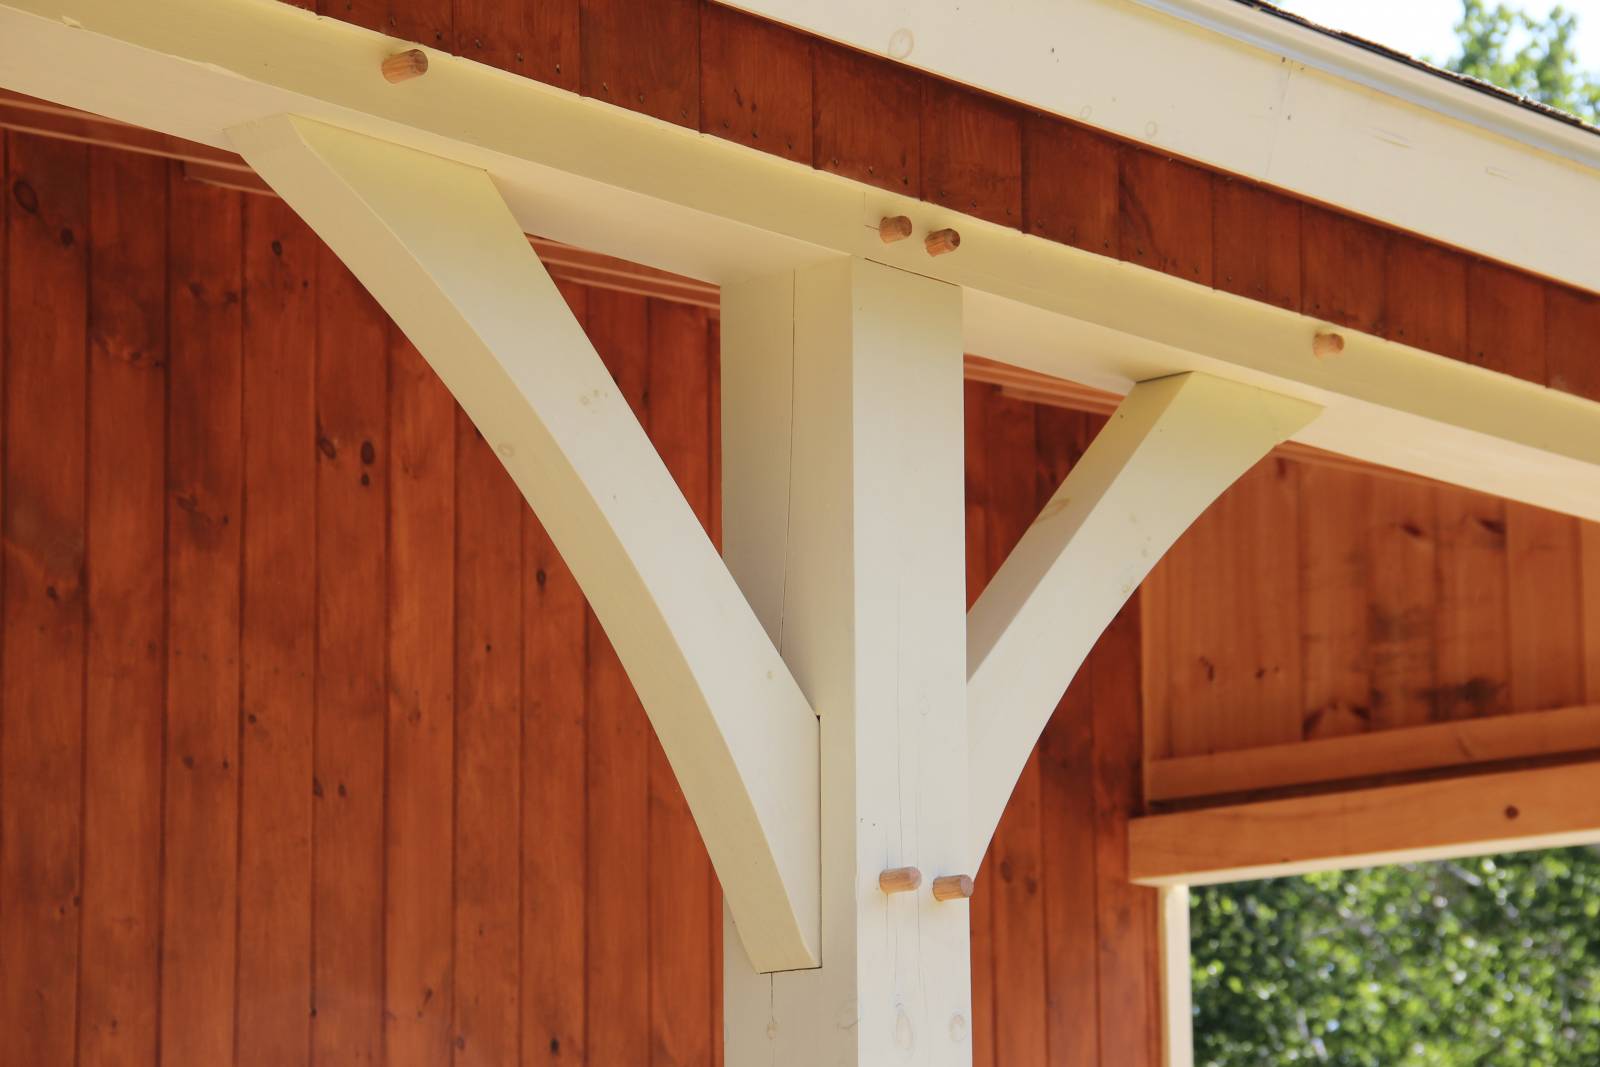 Arched Braces in the Timber Frame Open Lean-To Overhang